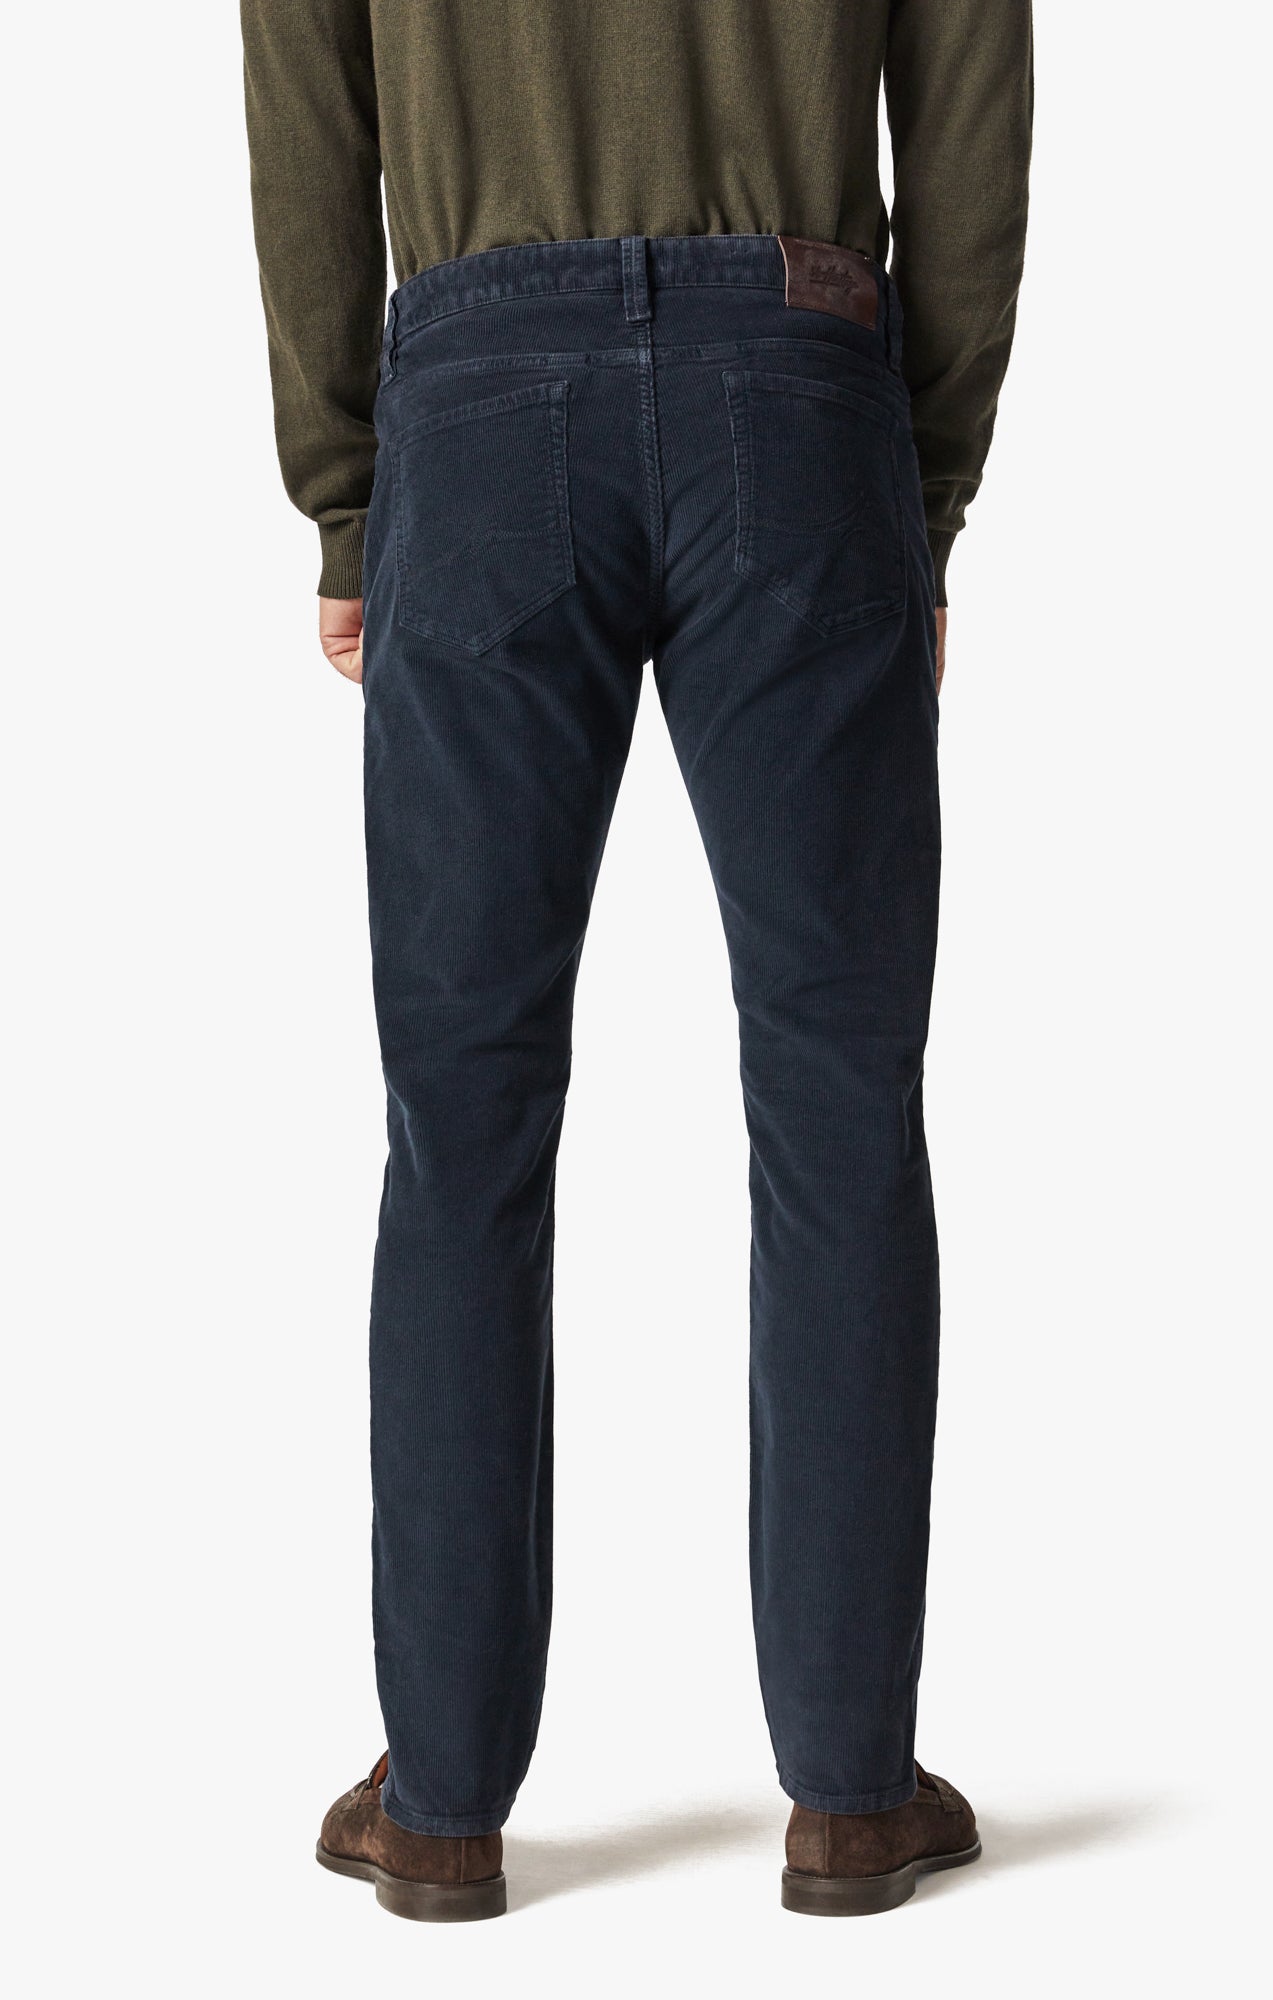 Cool Tapered Leg Pants In Navy Cord Image 4